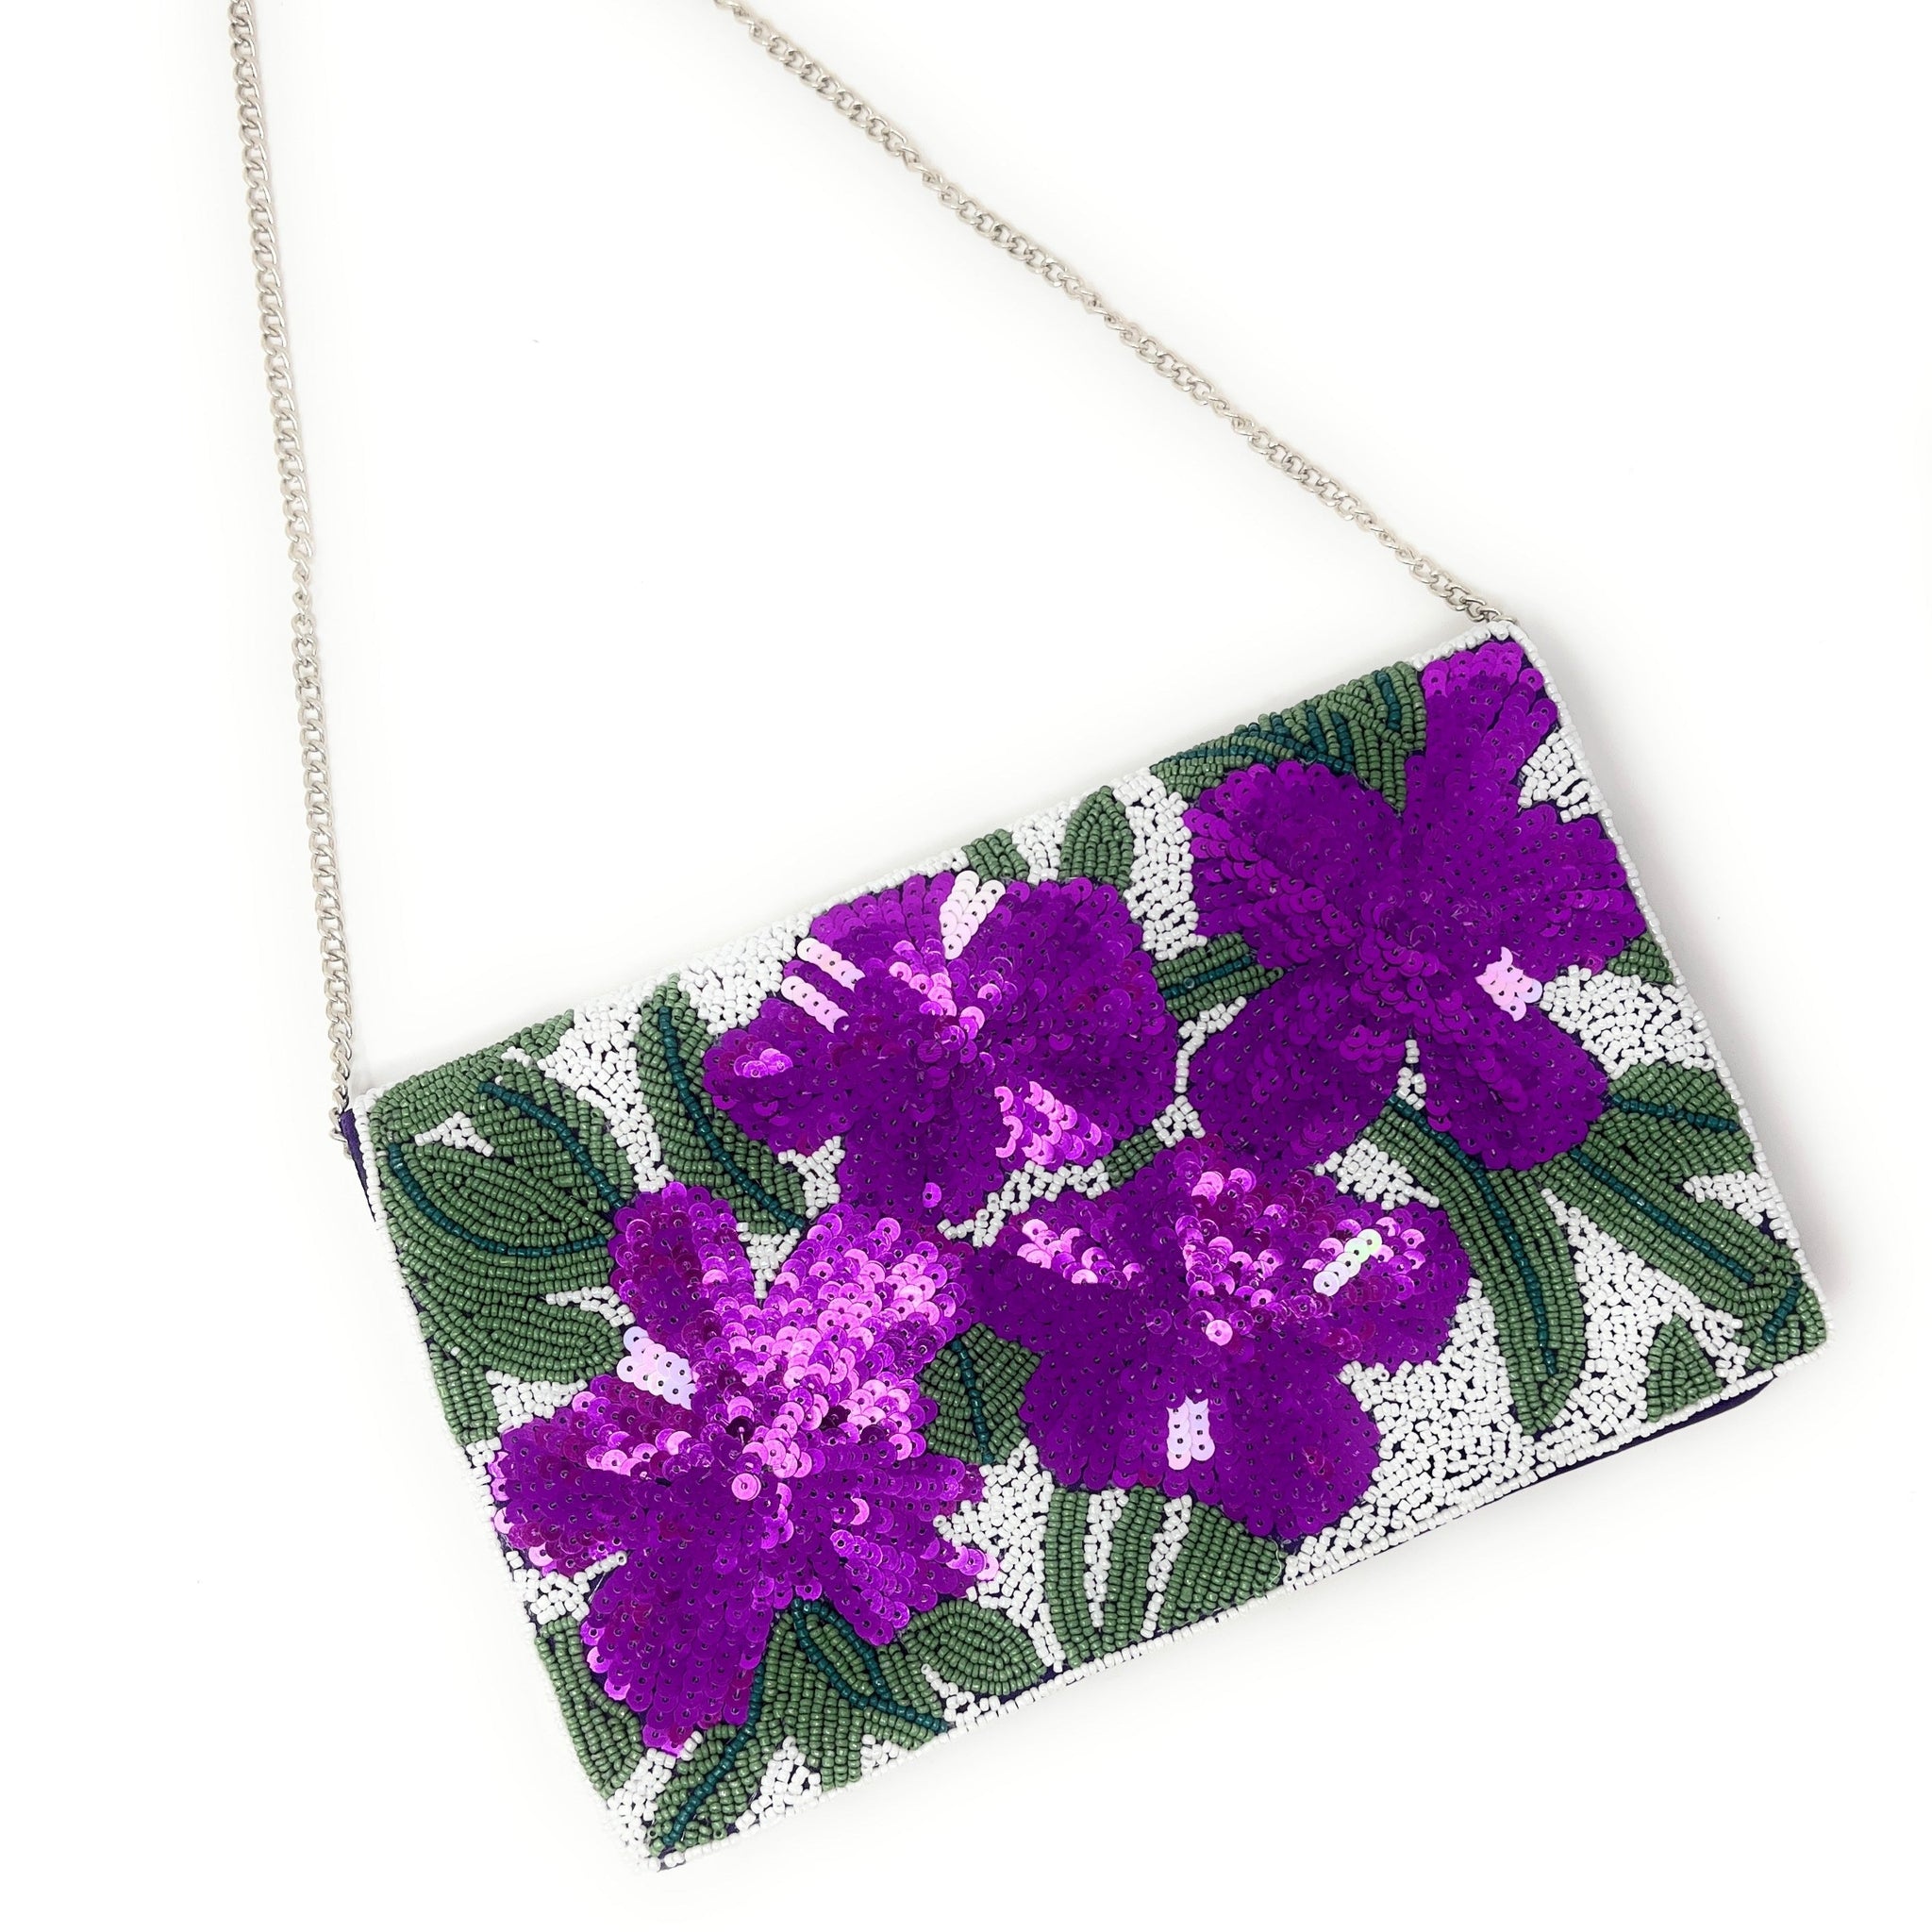 Purple Embroidery Clutch | Beaded clutch purse, Indian bridal jewelry sets,  Handmade bags